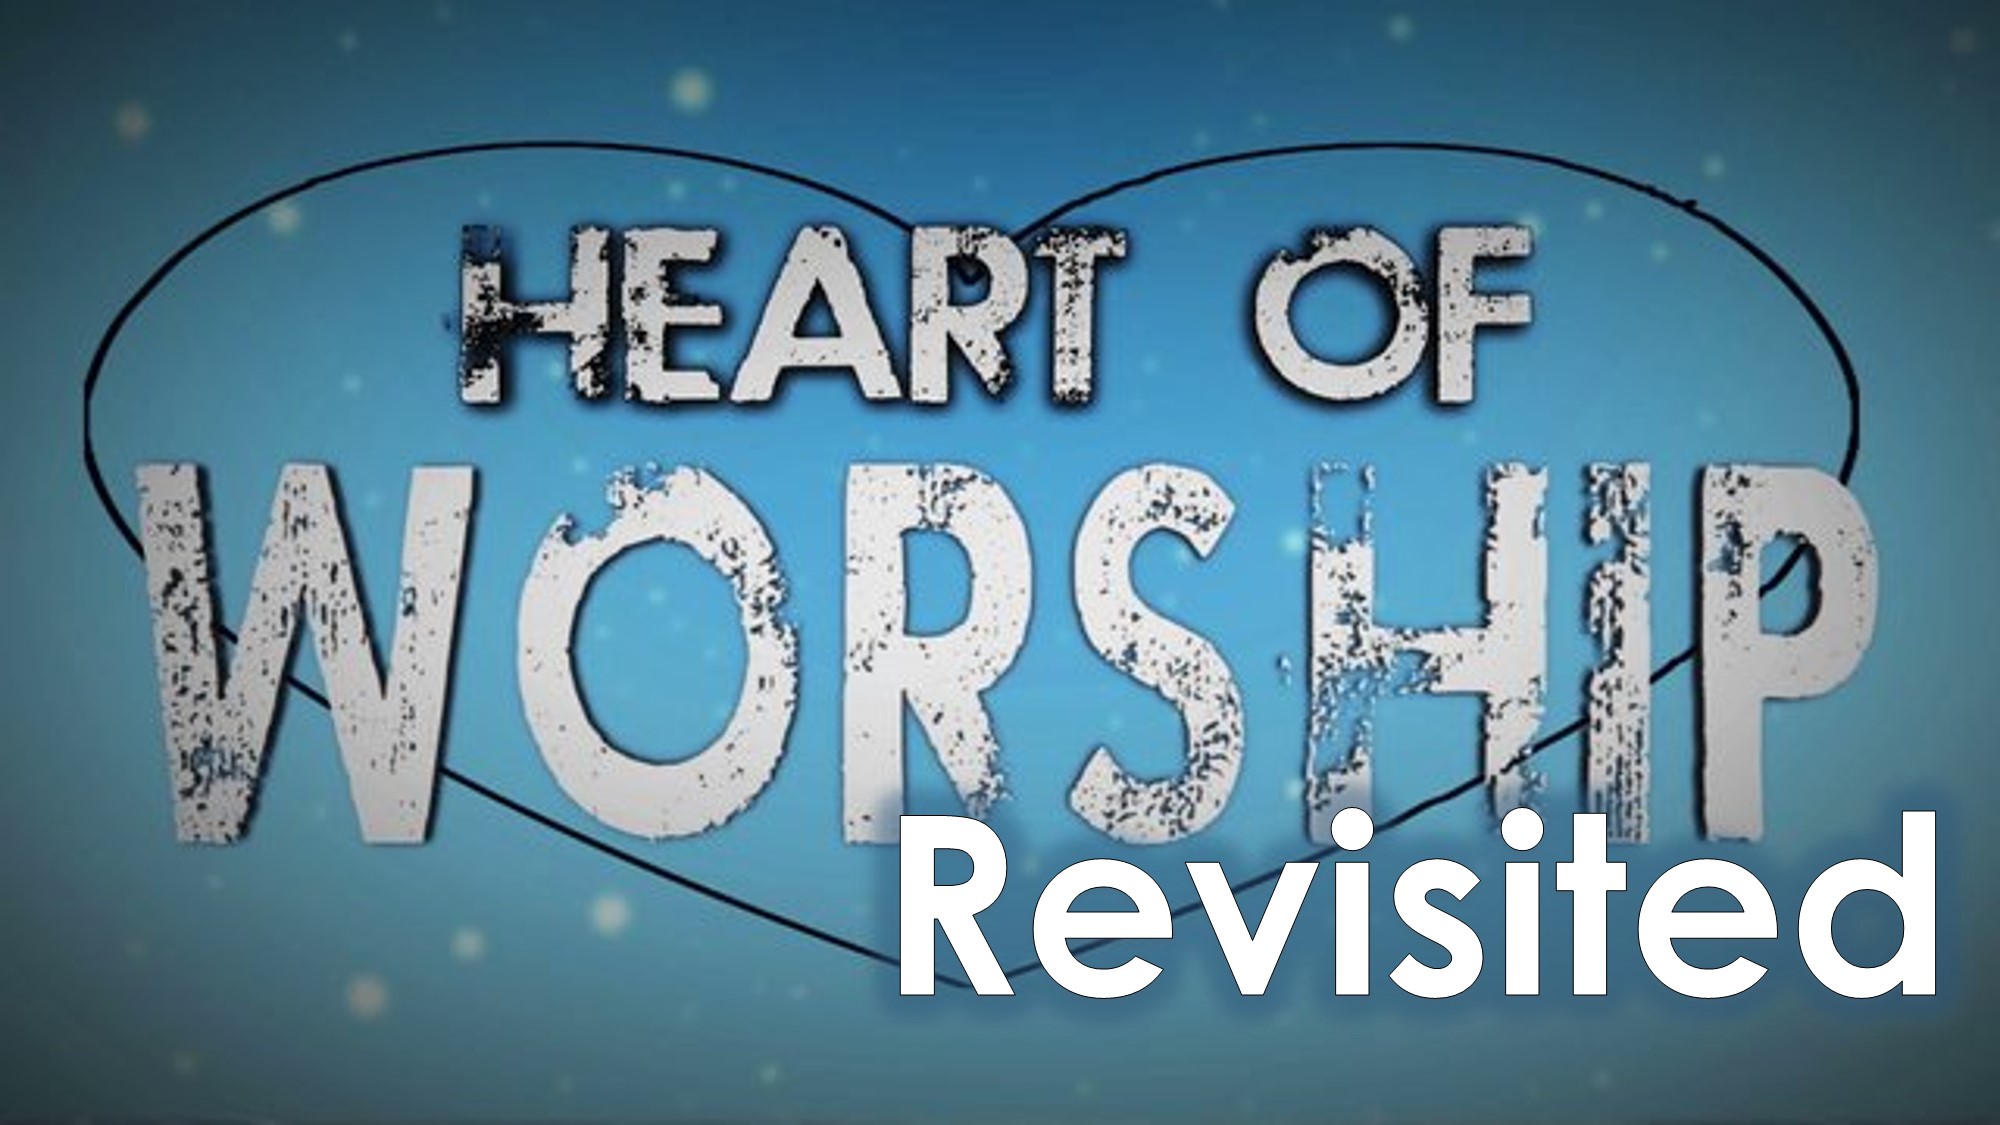 You are currently viewing The Heart of Worship Revisited – March 20th